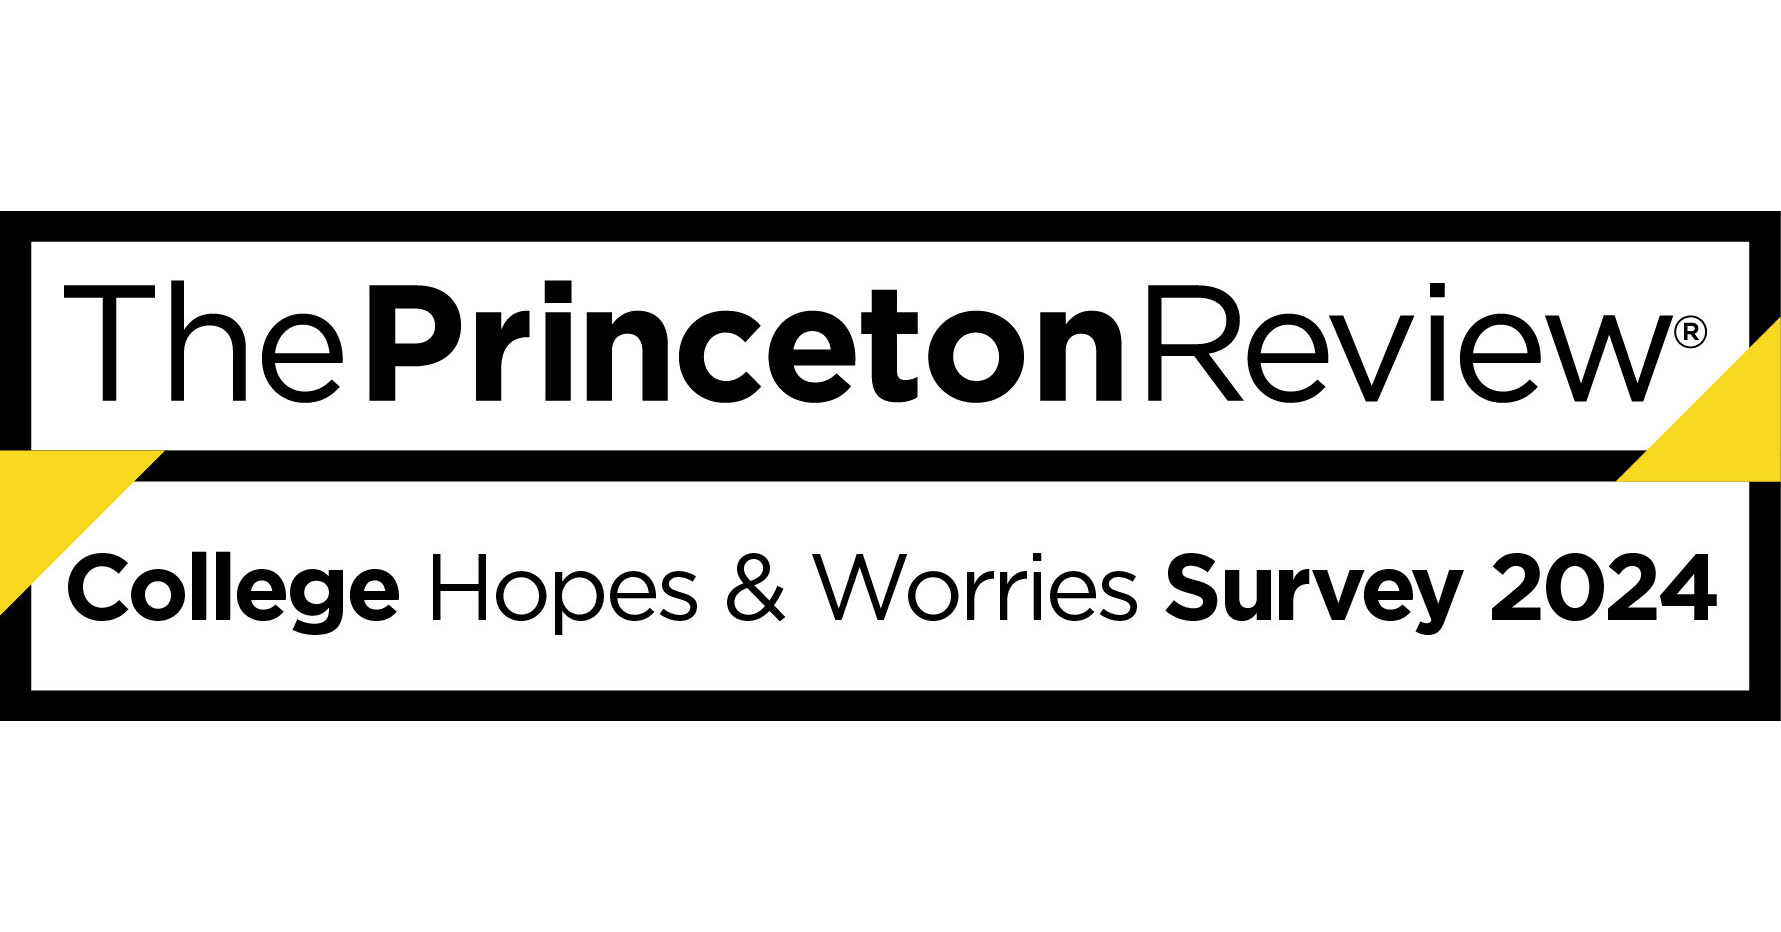 The Princeton Review Reports Its 2024 College Hopes & Worries Survey